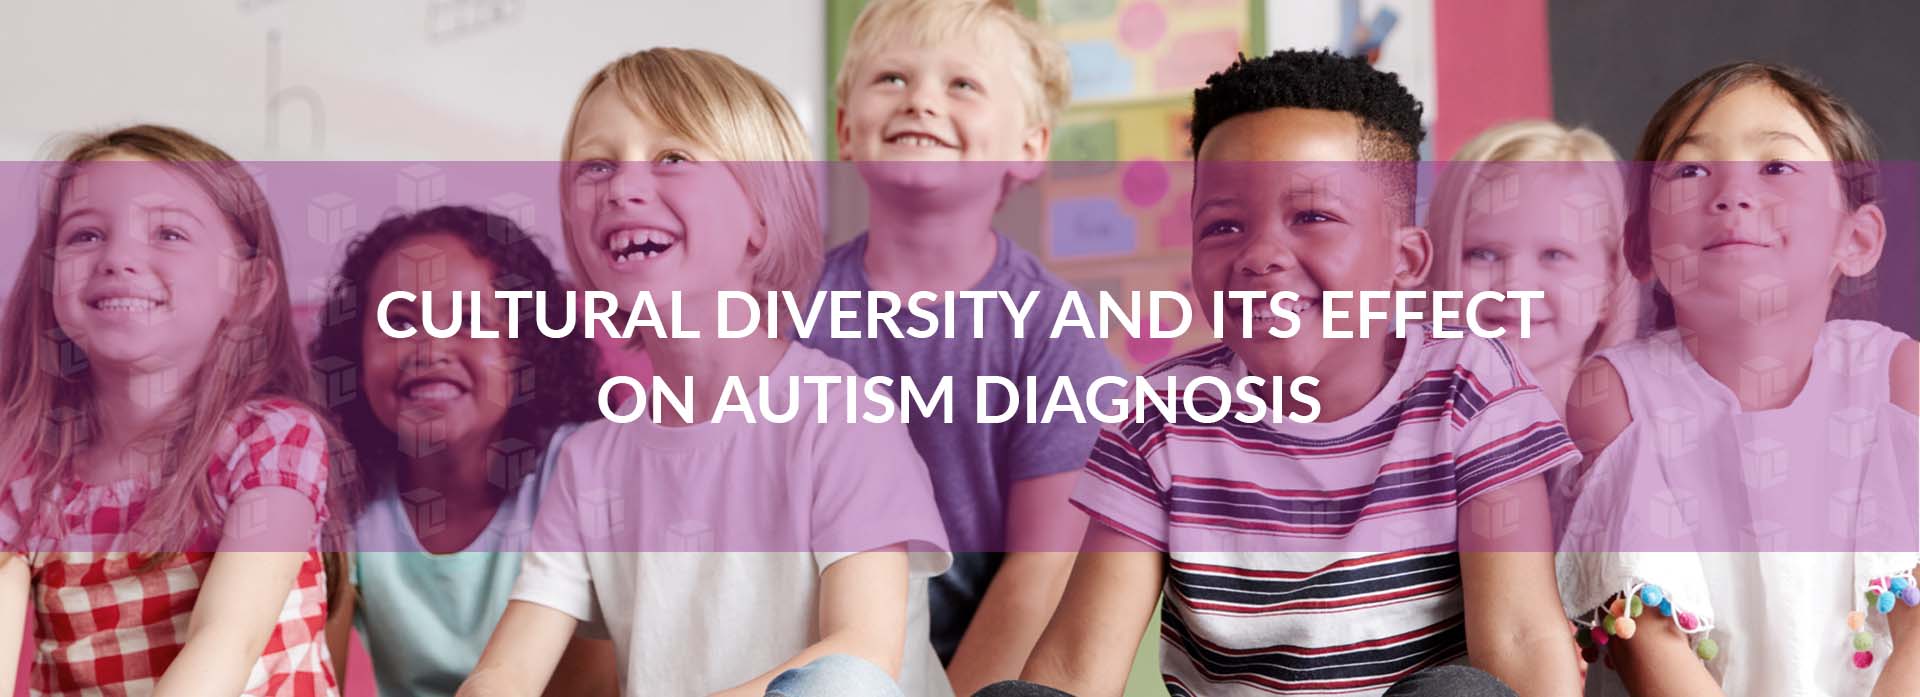 Cultural Diversity And Its Effect On Autism Diagnosis